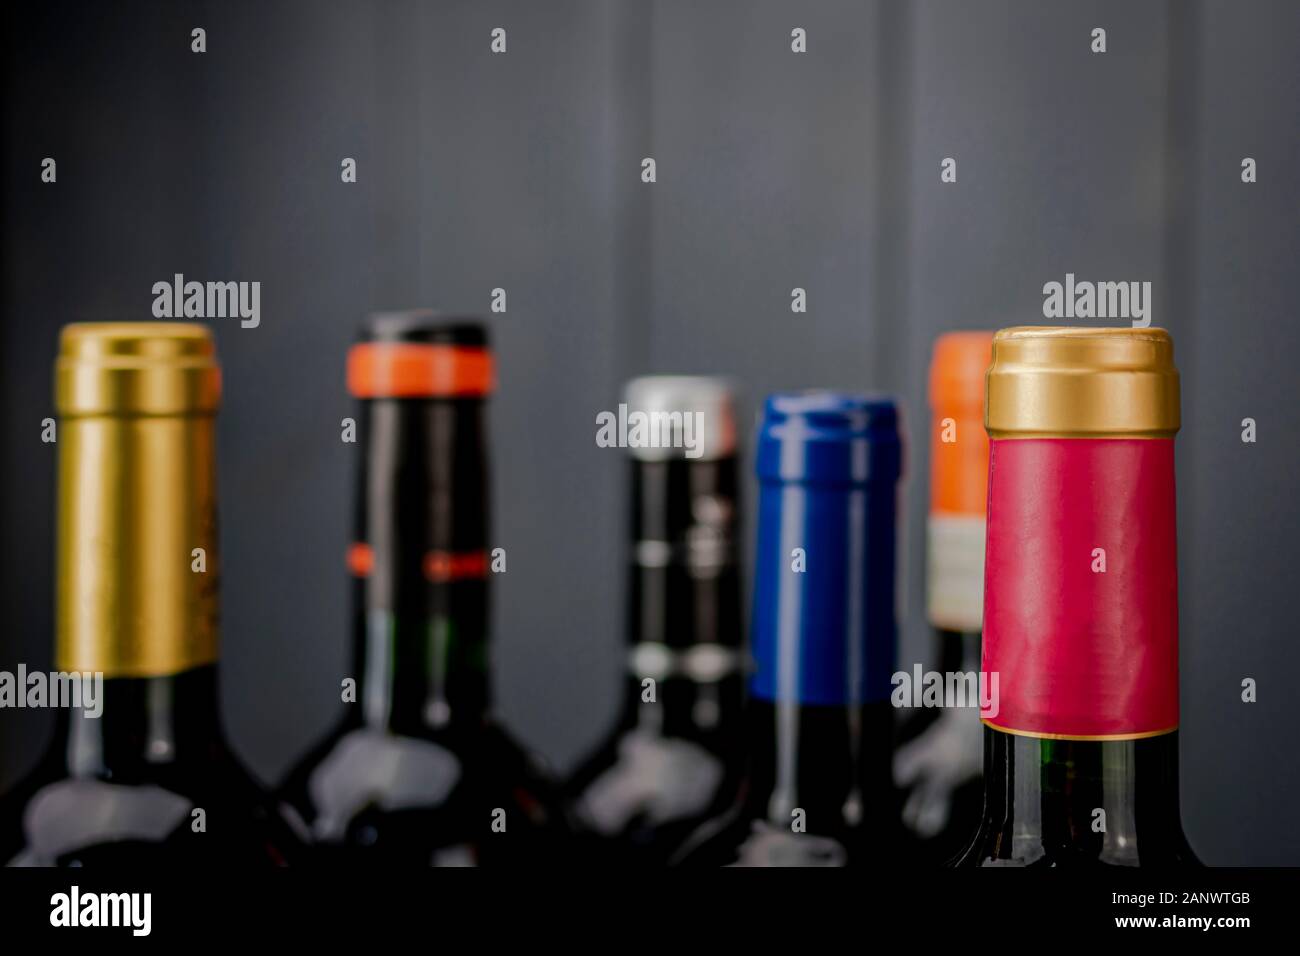 Set of unopened red wine bottle labels from different manufacturers with different color labels on gray wooden background Stock Photo